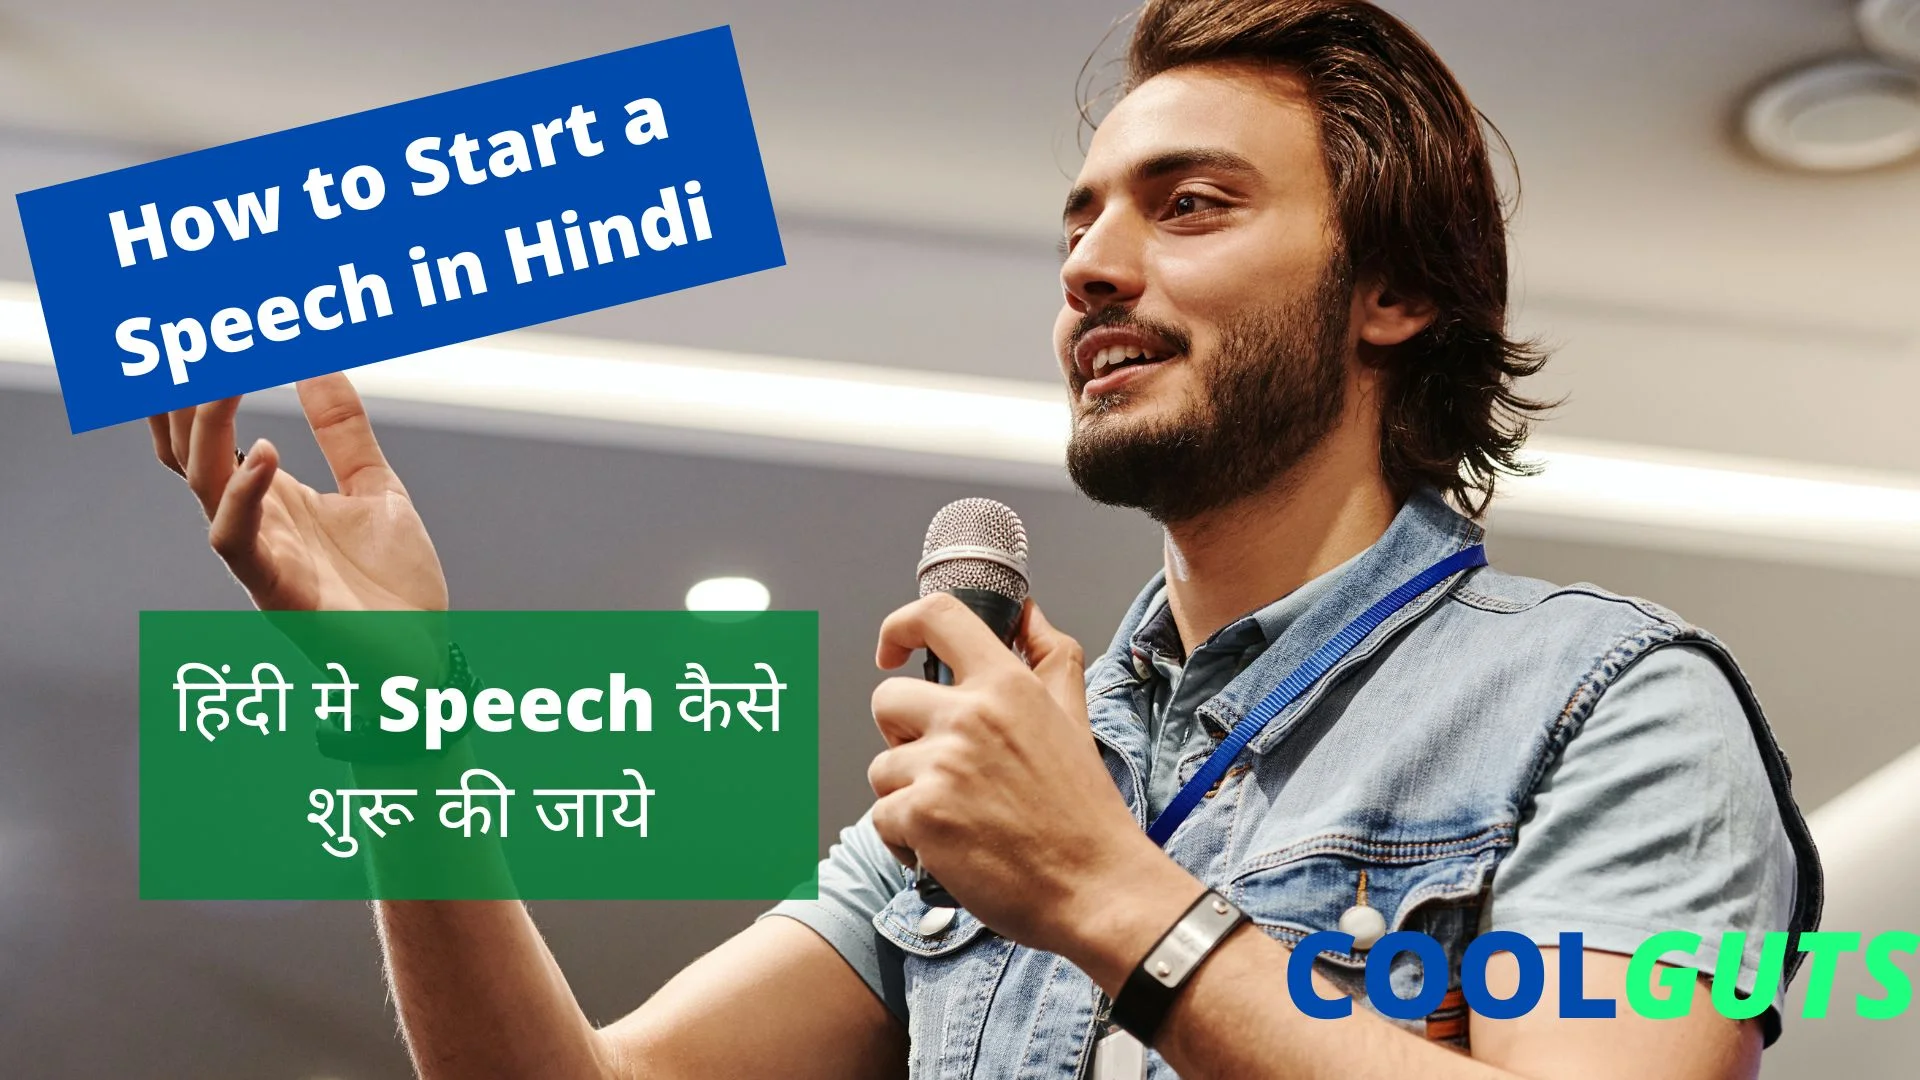 How to Start a Speech in Hindi